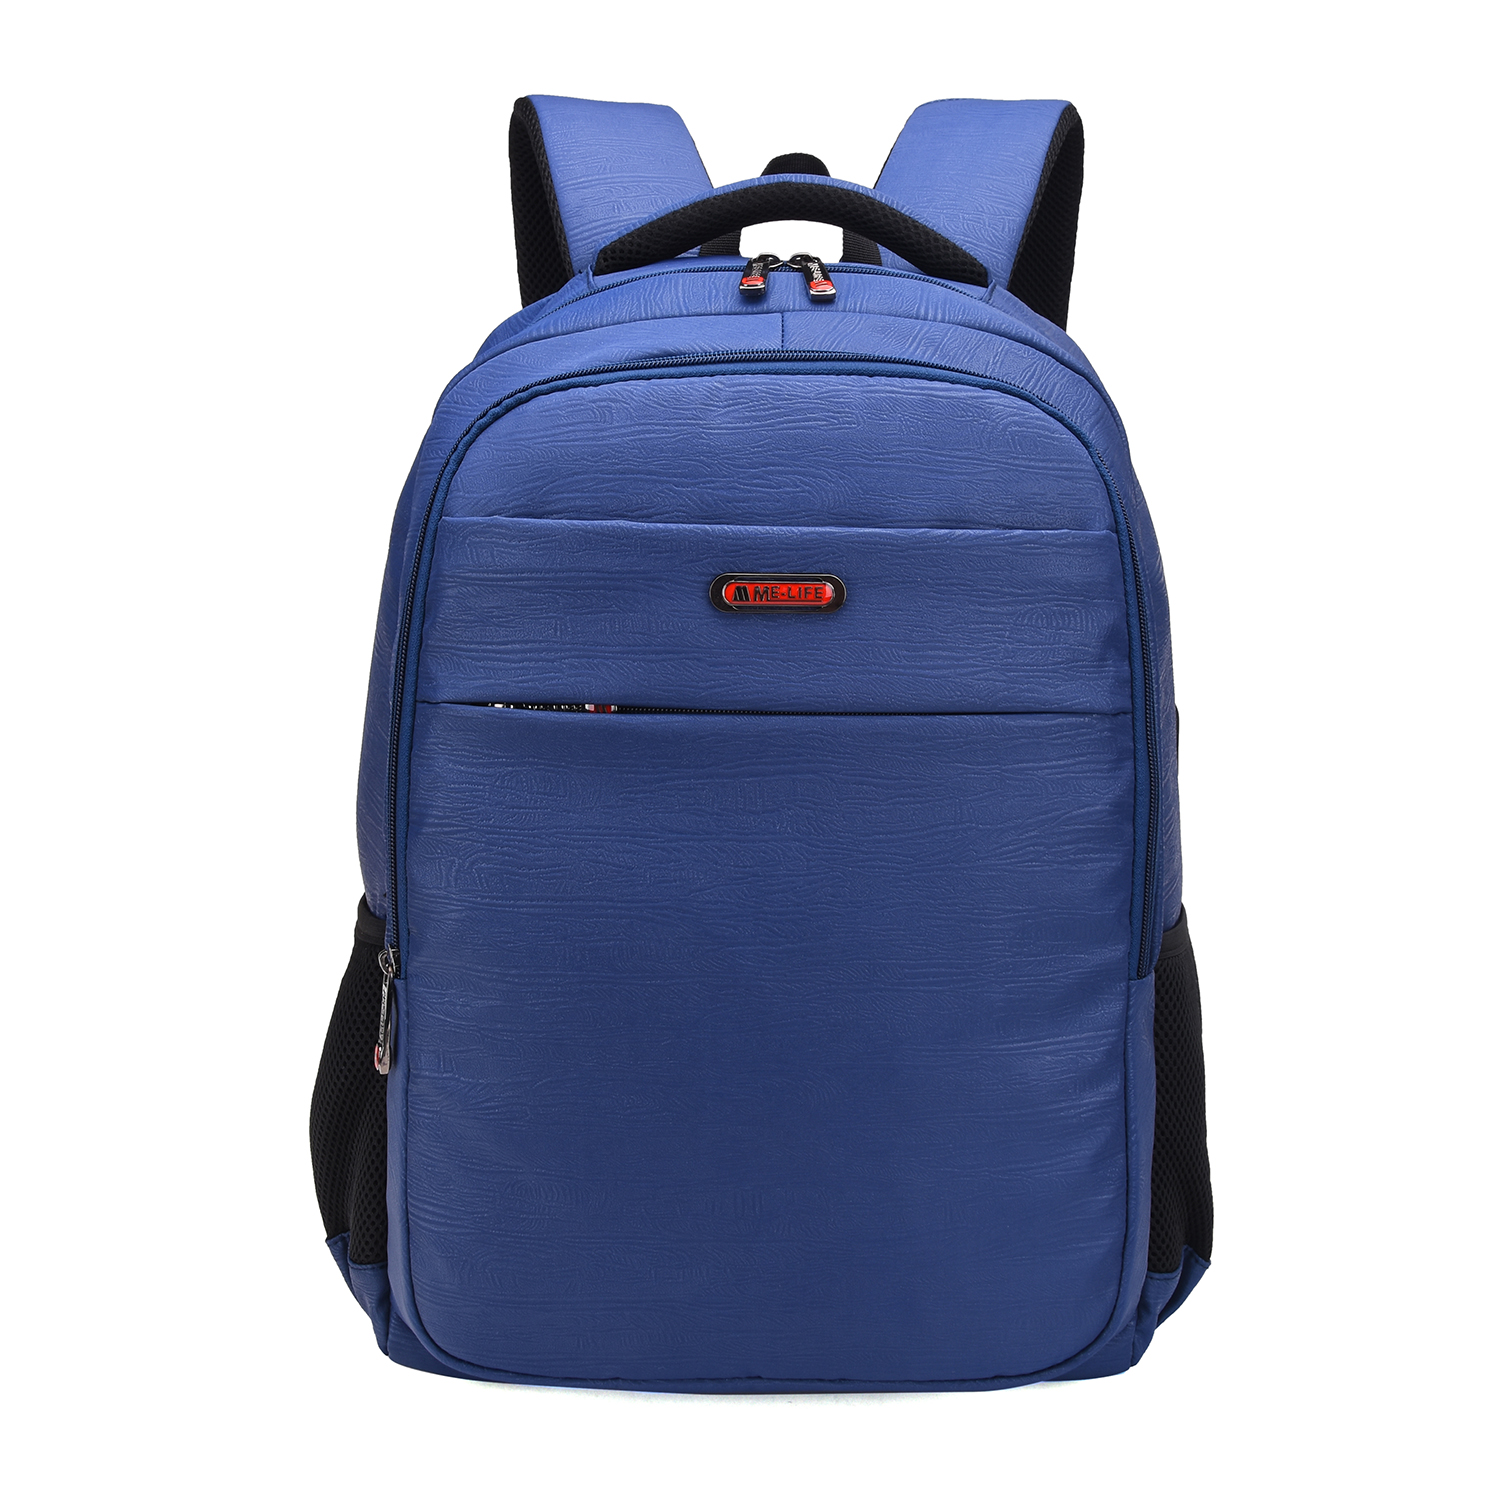 1770-331 New design backpack laptop bags